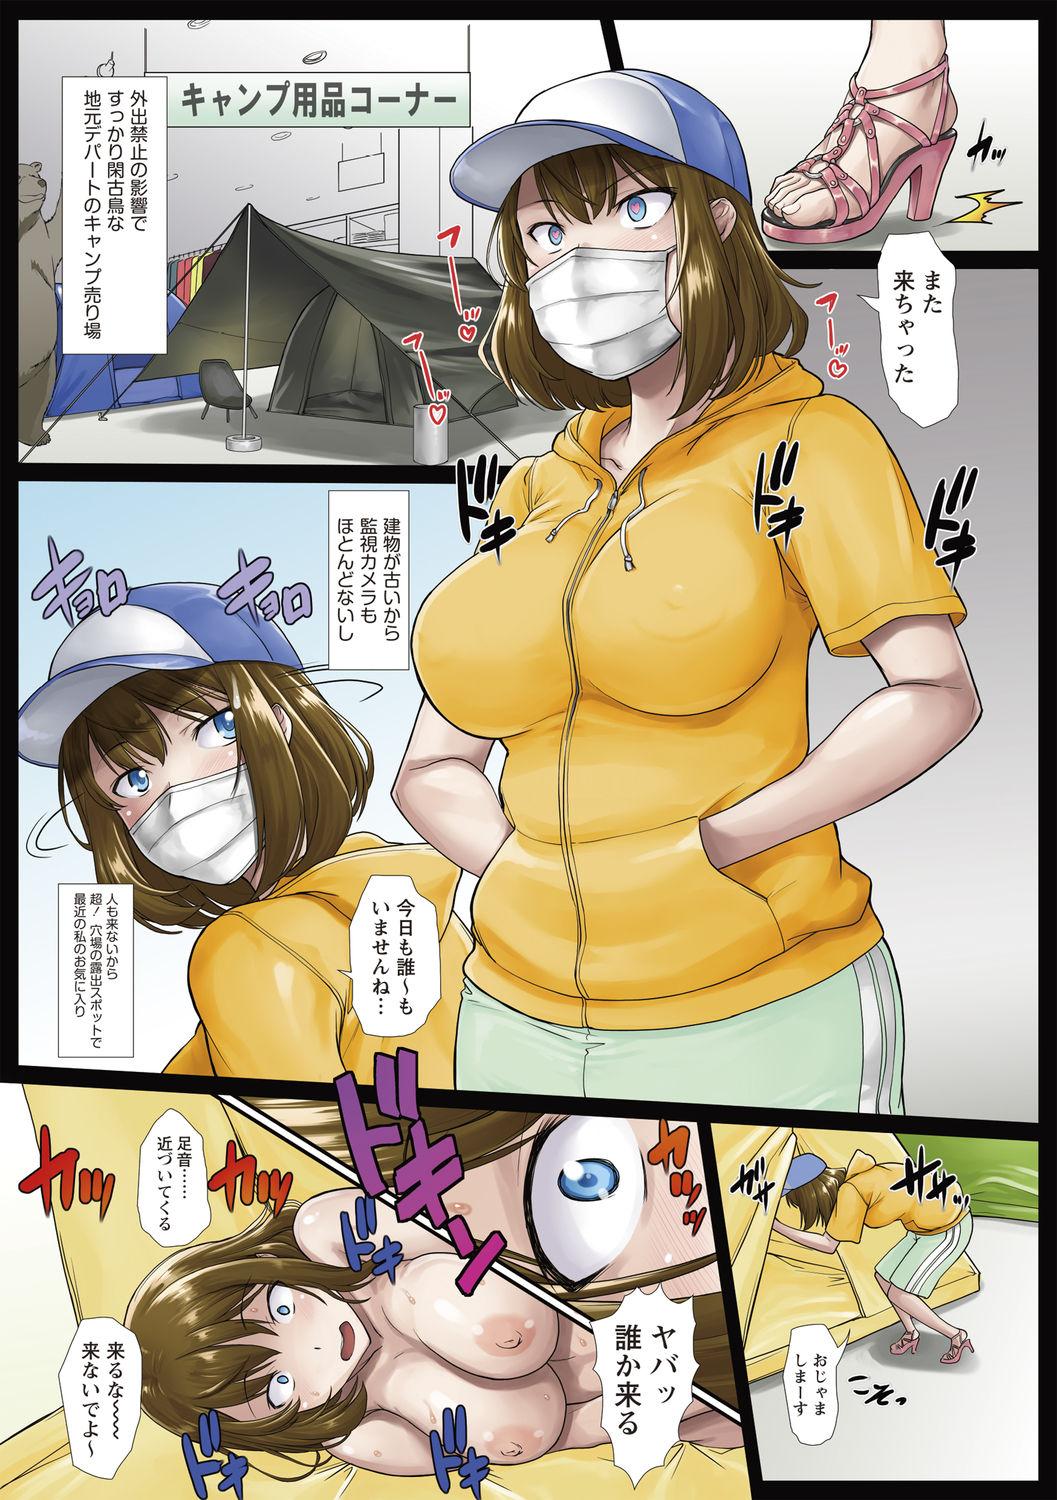 Best Blowjobs COMIC Masyo 2020-09 Flagra - Page 4